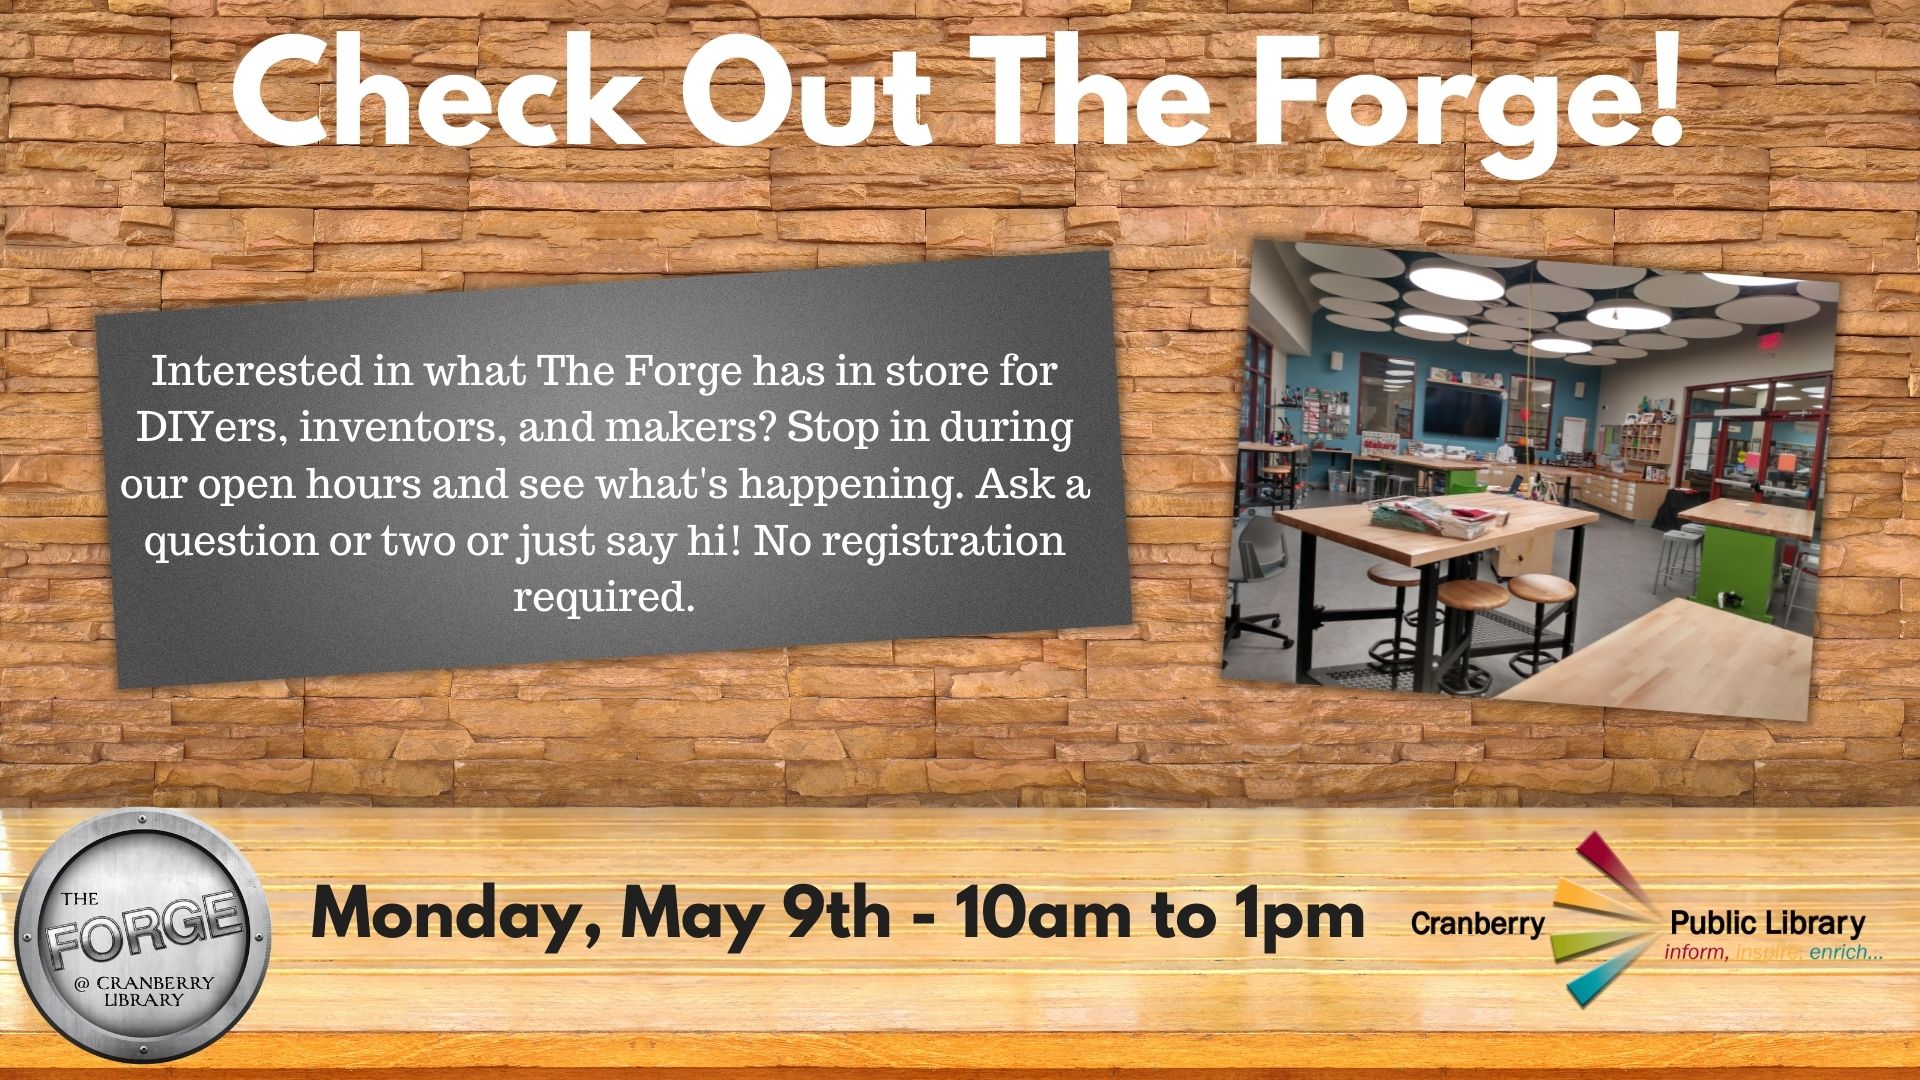 Check Out The Forge flyer